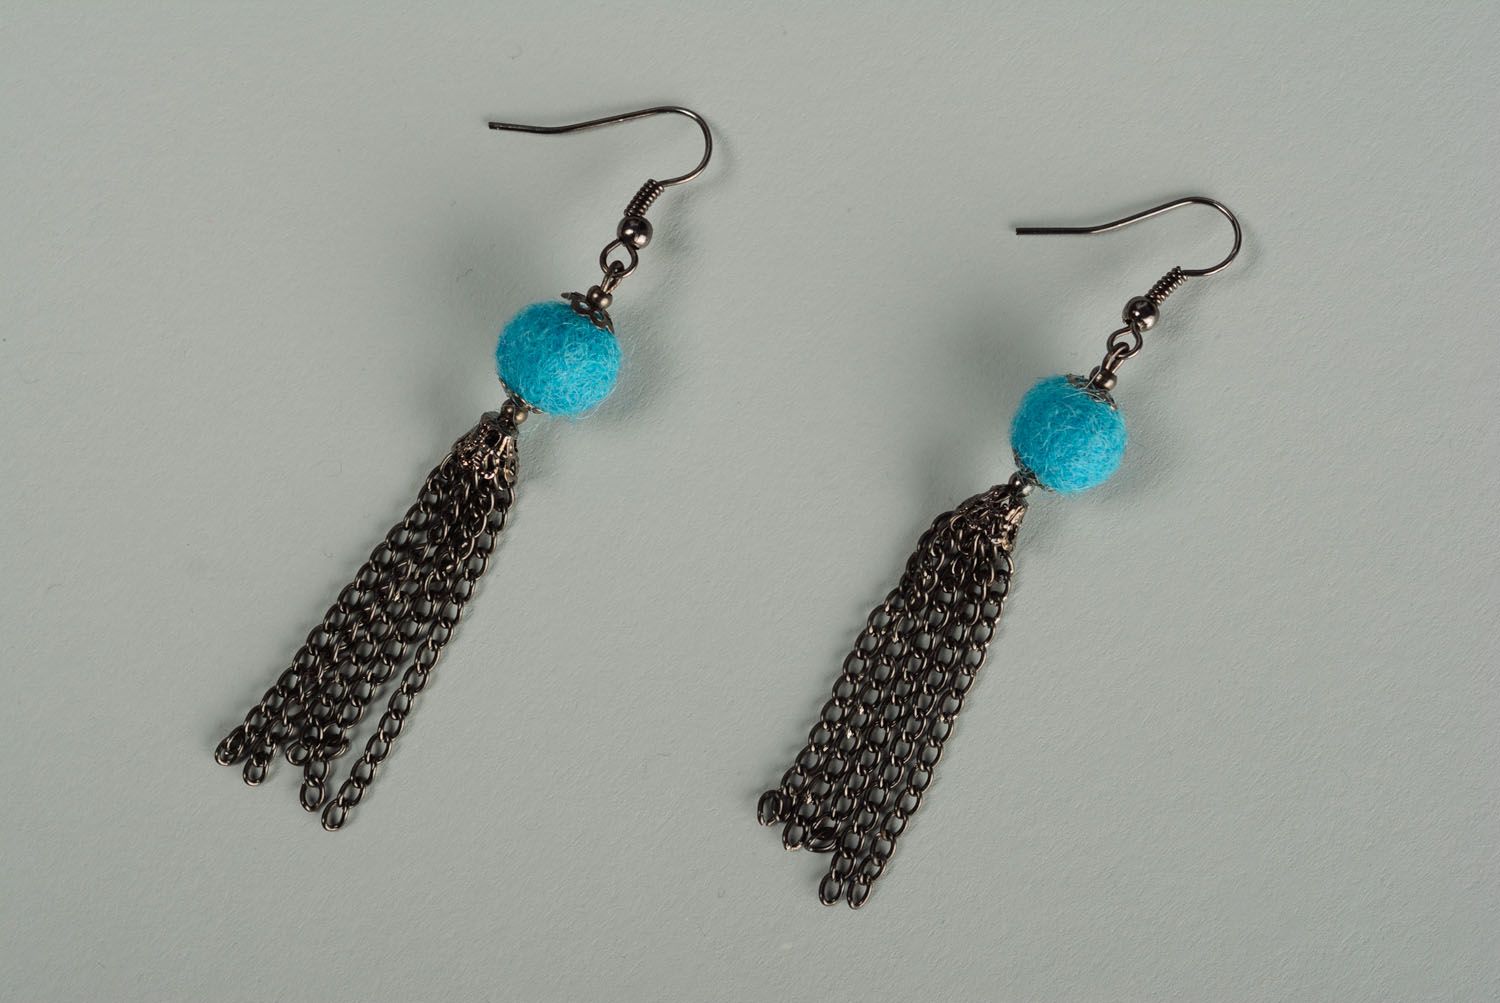 Earrings with charms in the form of chains photo 1